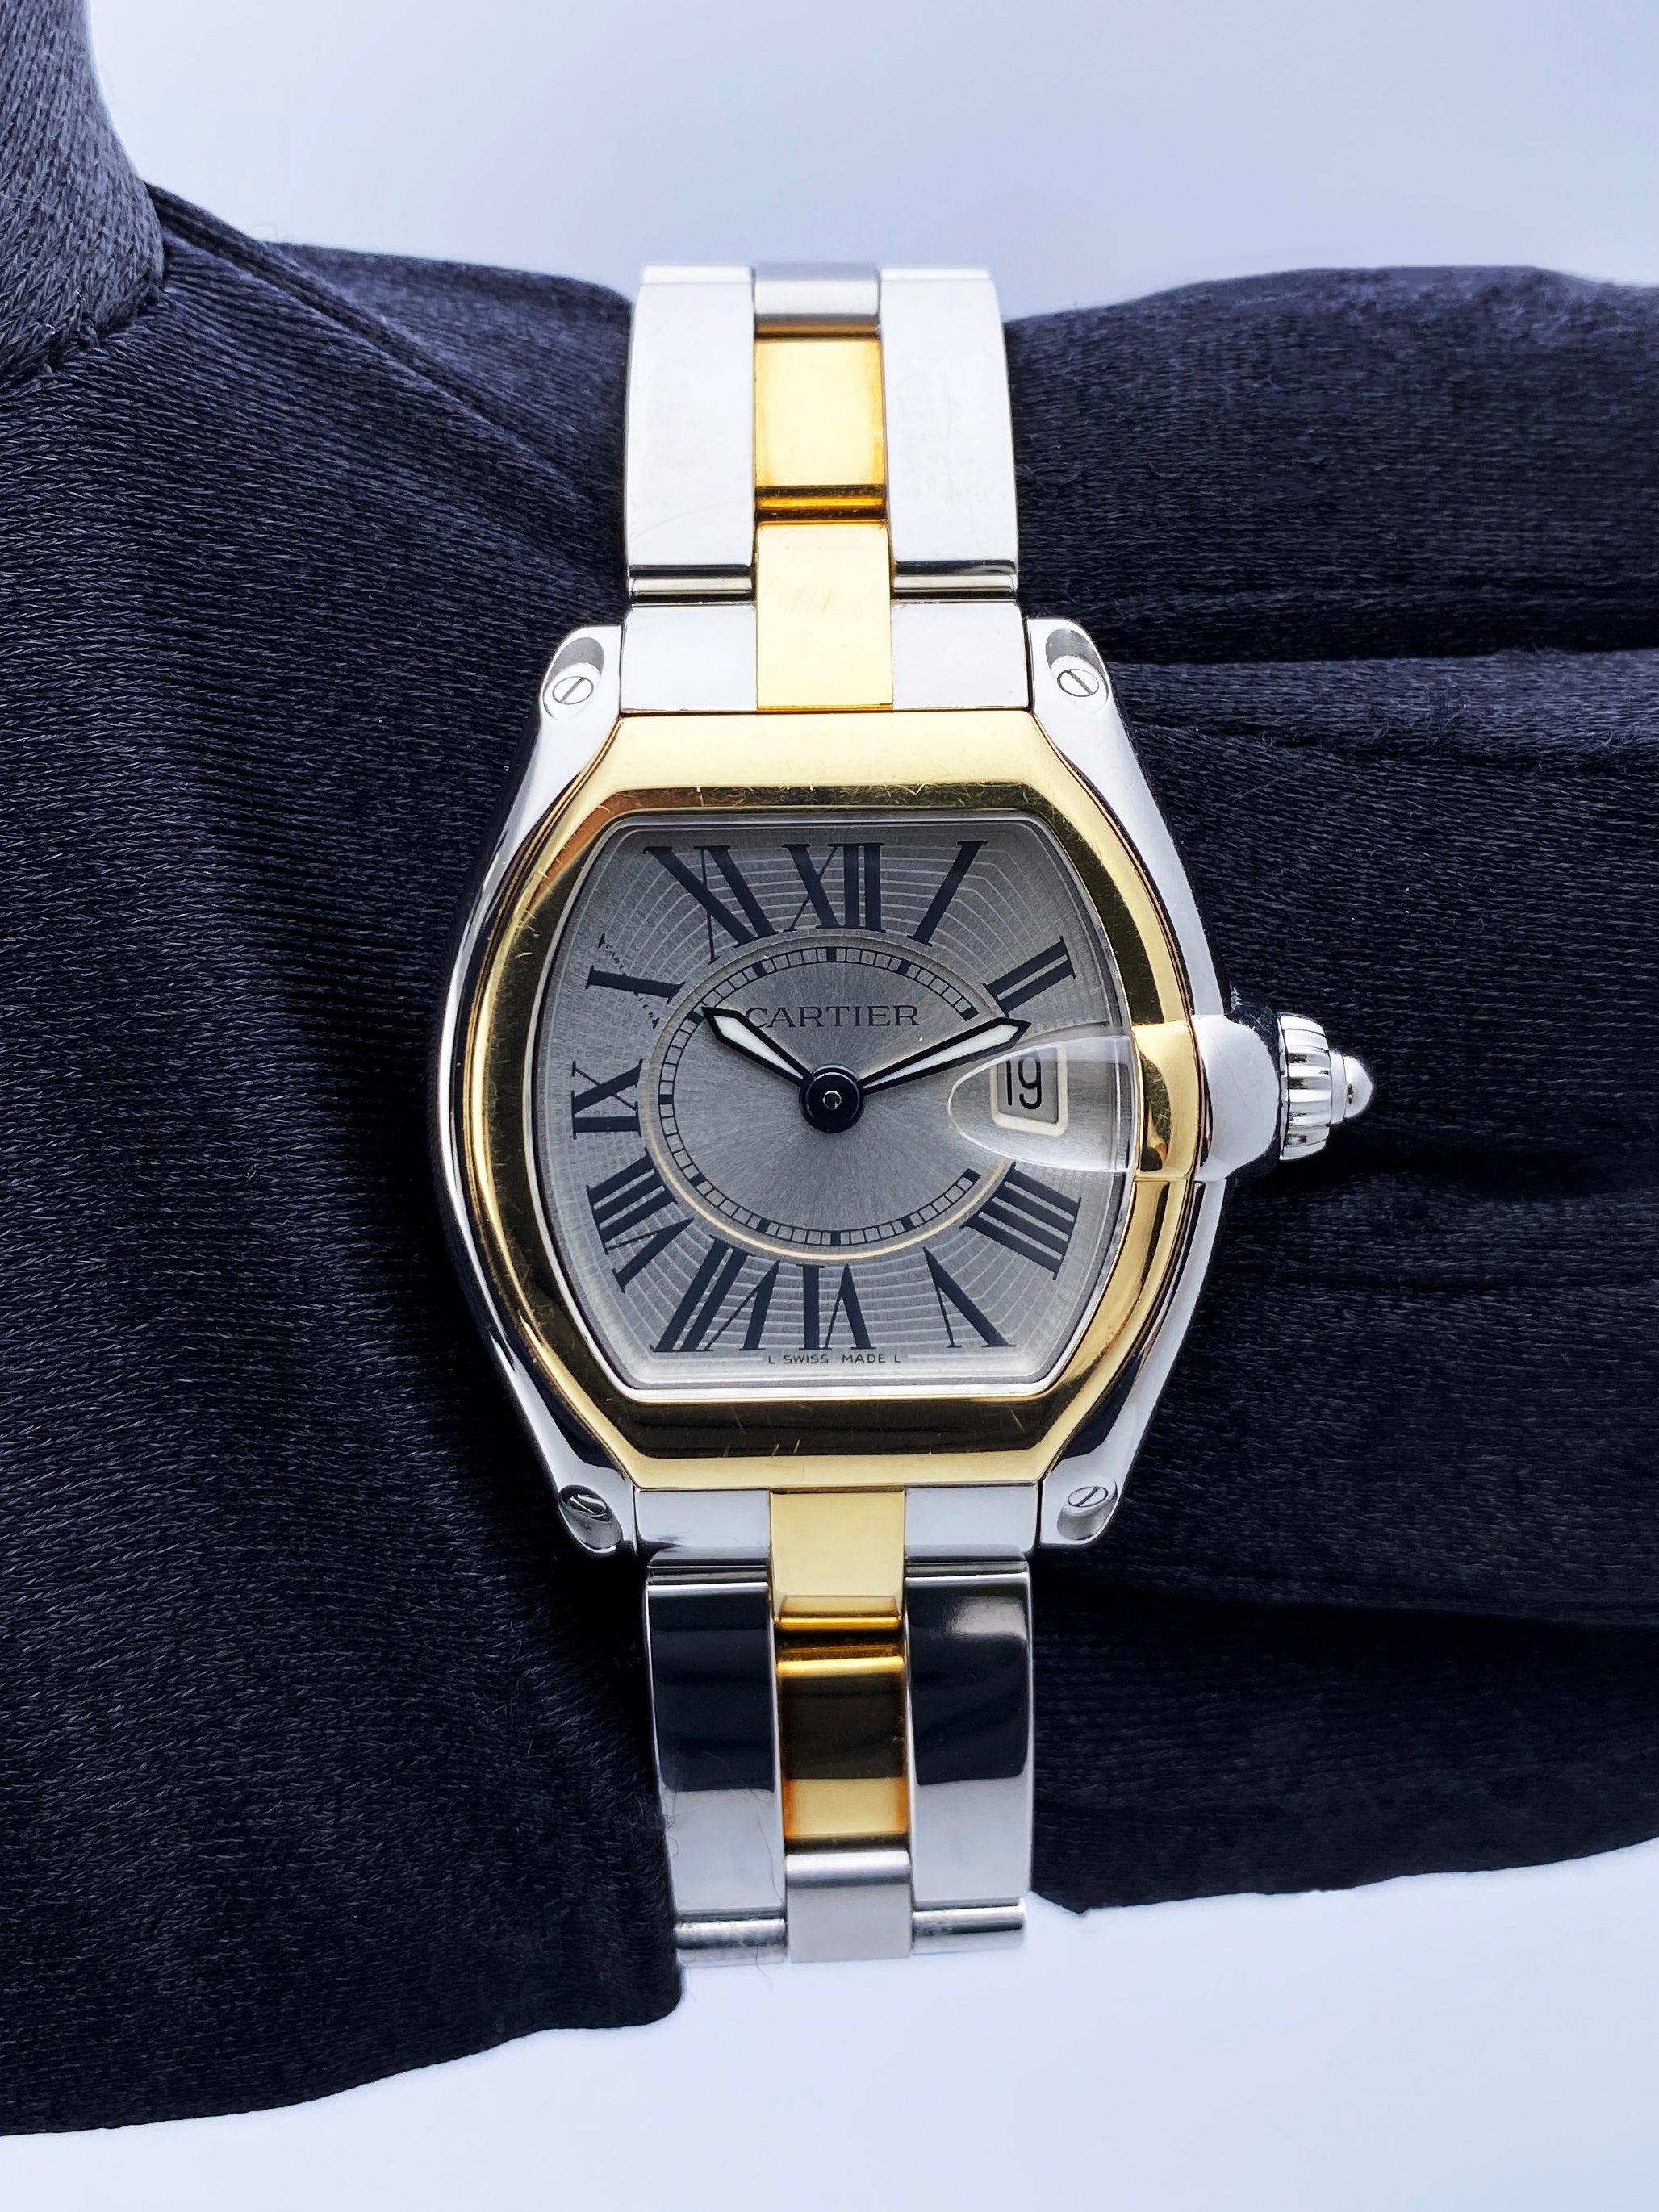 Cartier Roadster 2675 Ladies Watch. 32mm stainless steel case with 18K yellow gold smooth bezel. Silver dial with luminous hands and black Roman numeral markers. Date display at the 3 o'clock position. Minute marker on the inner dial. 18K yellow